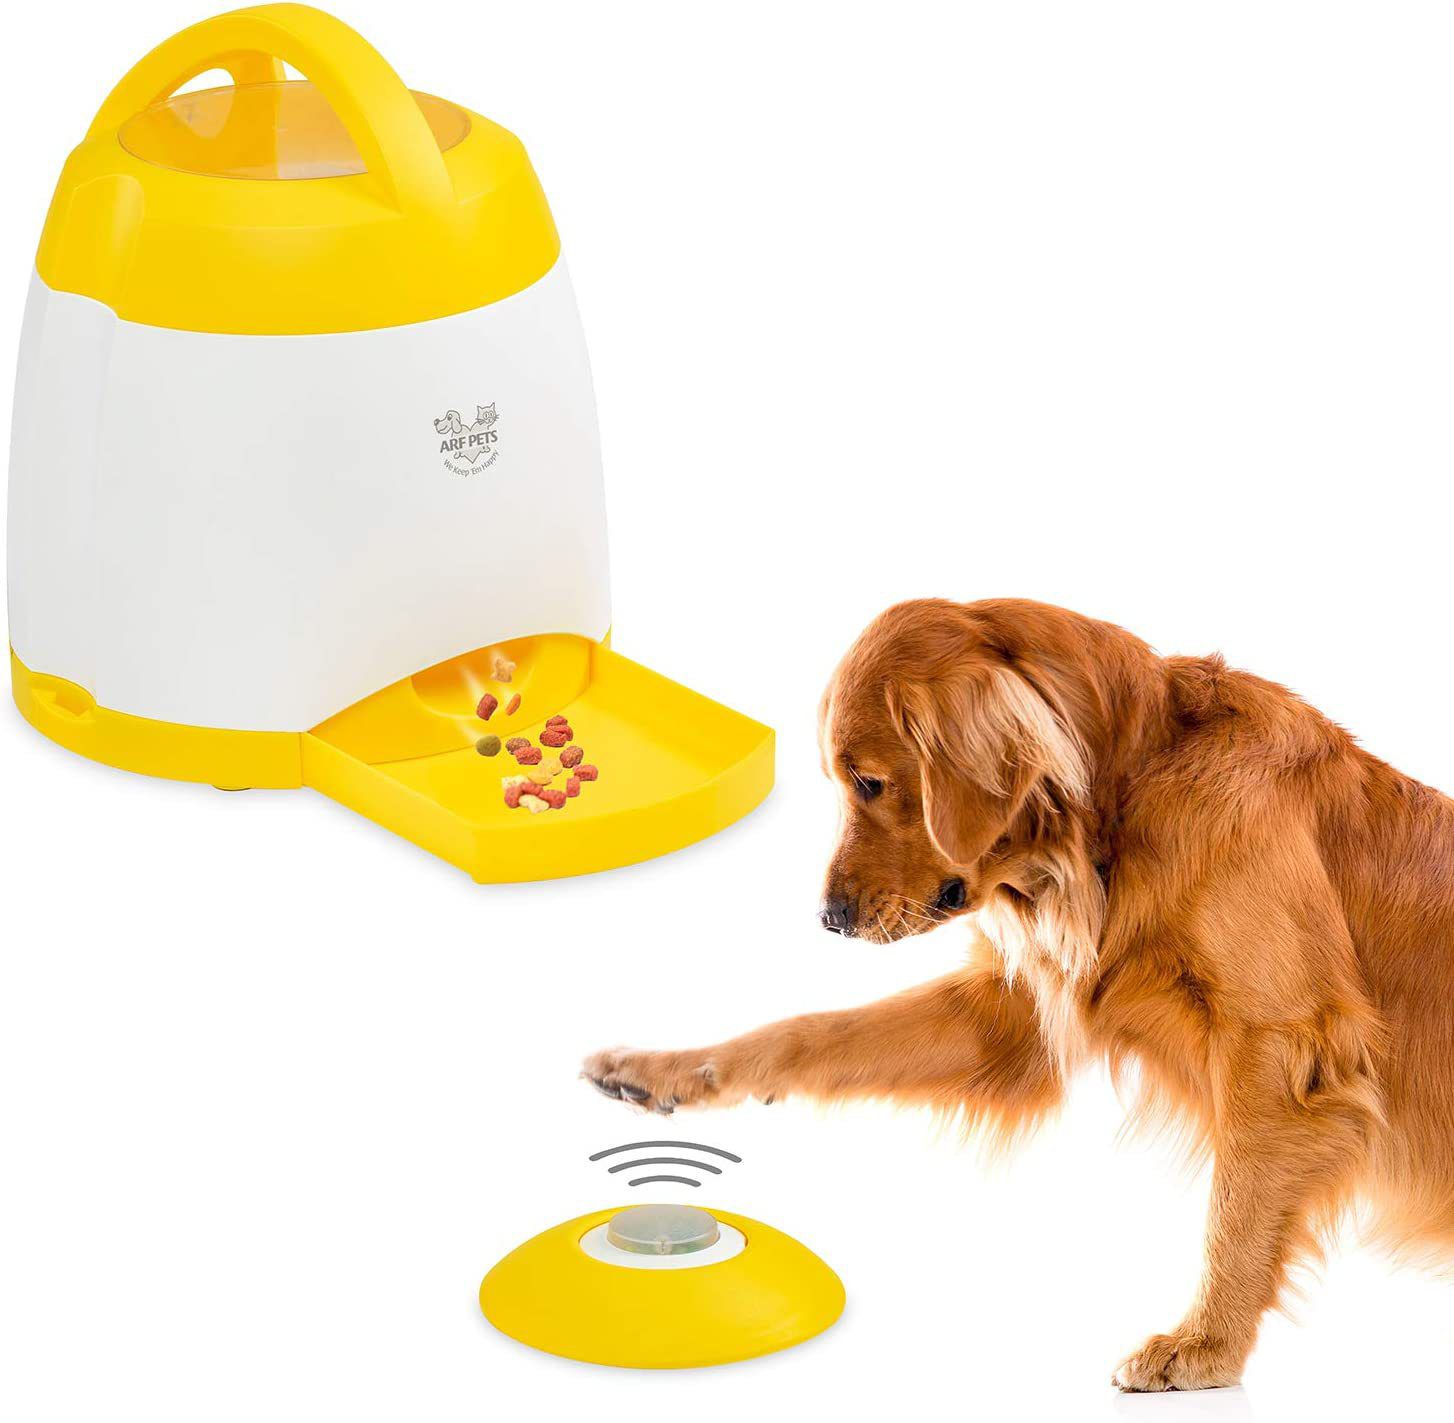 DIY Treat Toys to Keep Your Dog Busy - Kol's Notes